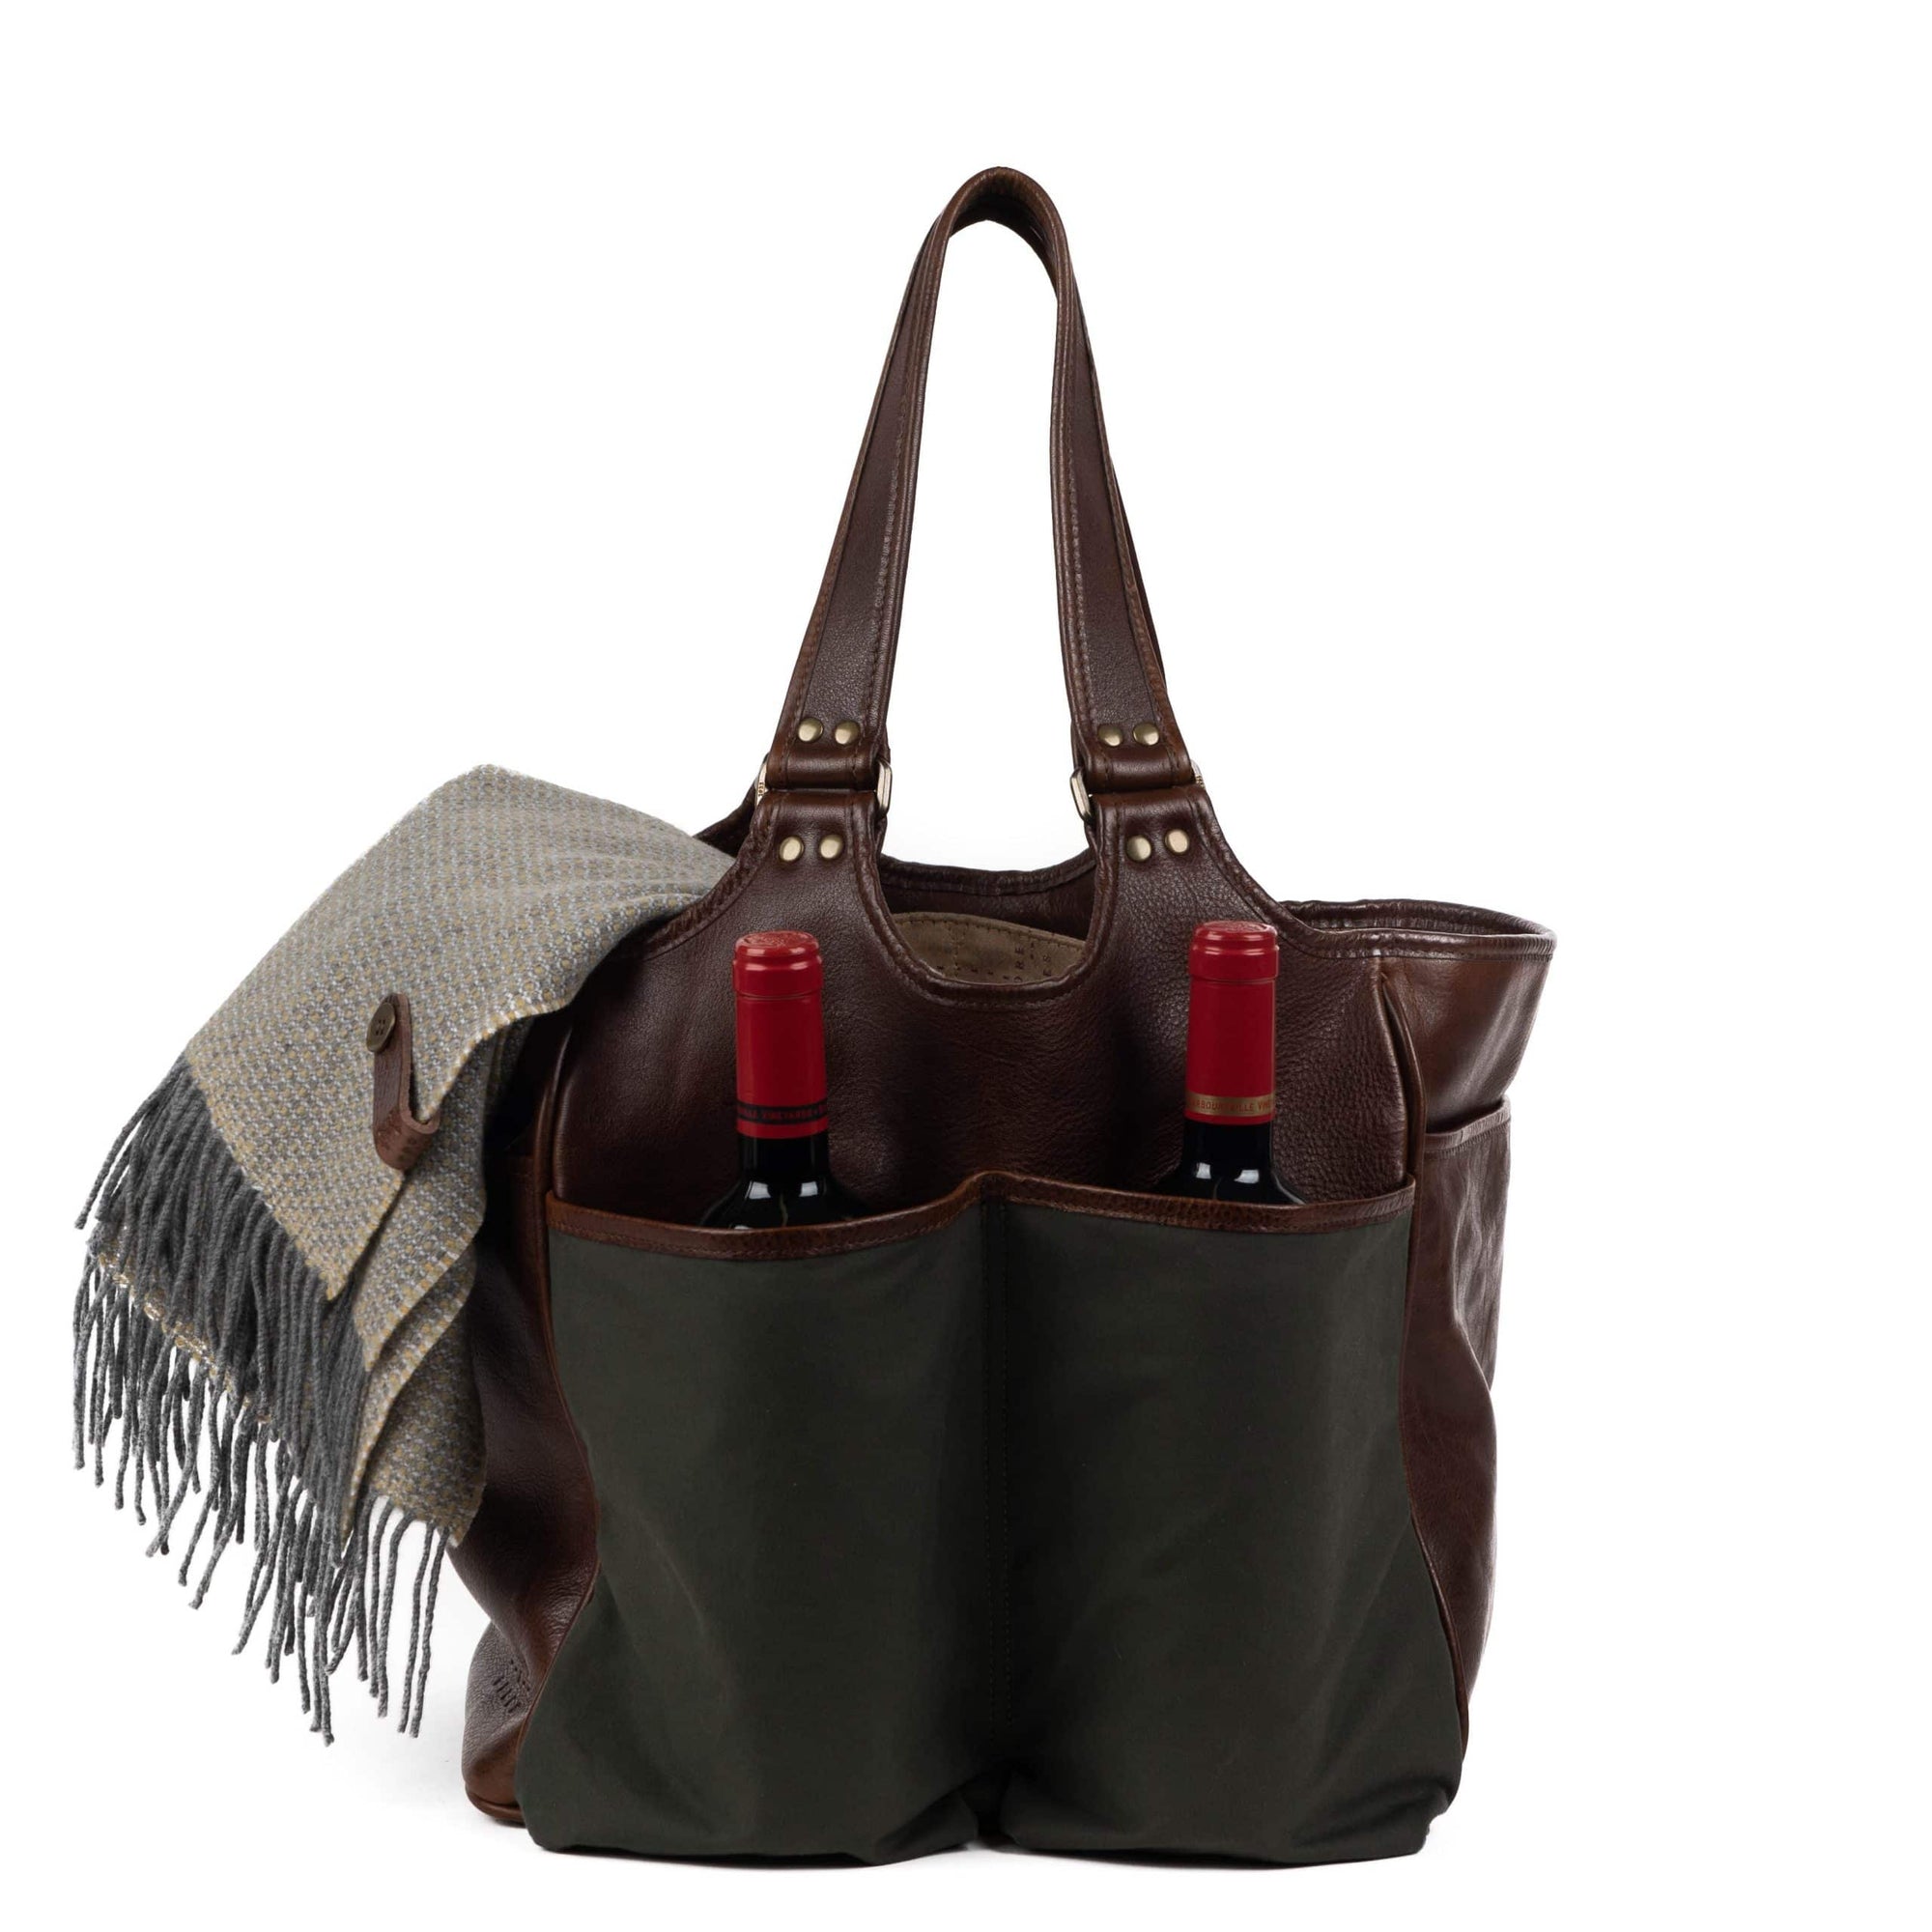 Belle Picnic Tote in Olive Ventile and Titan Milled Brown by Moore & Giles